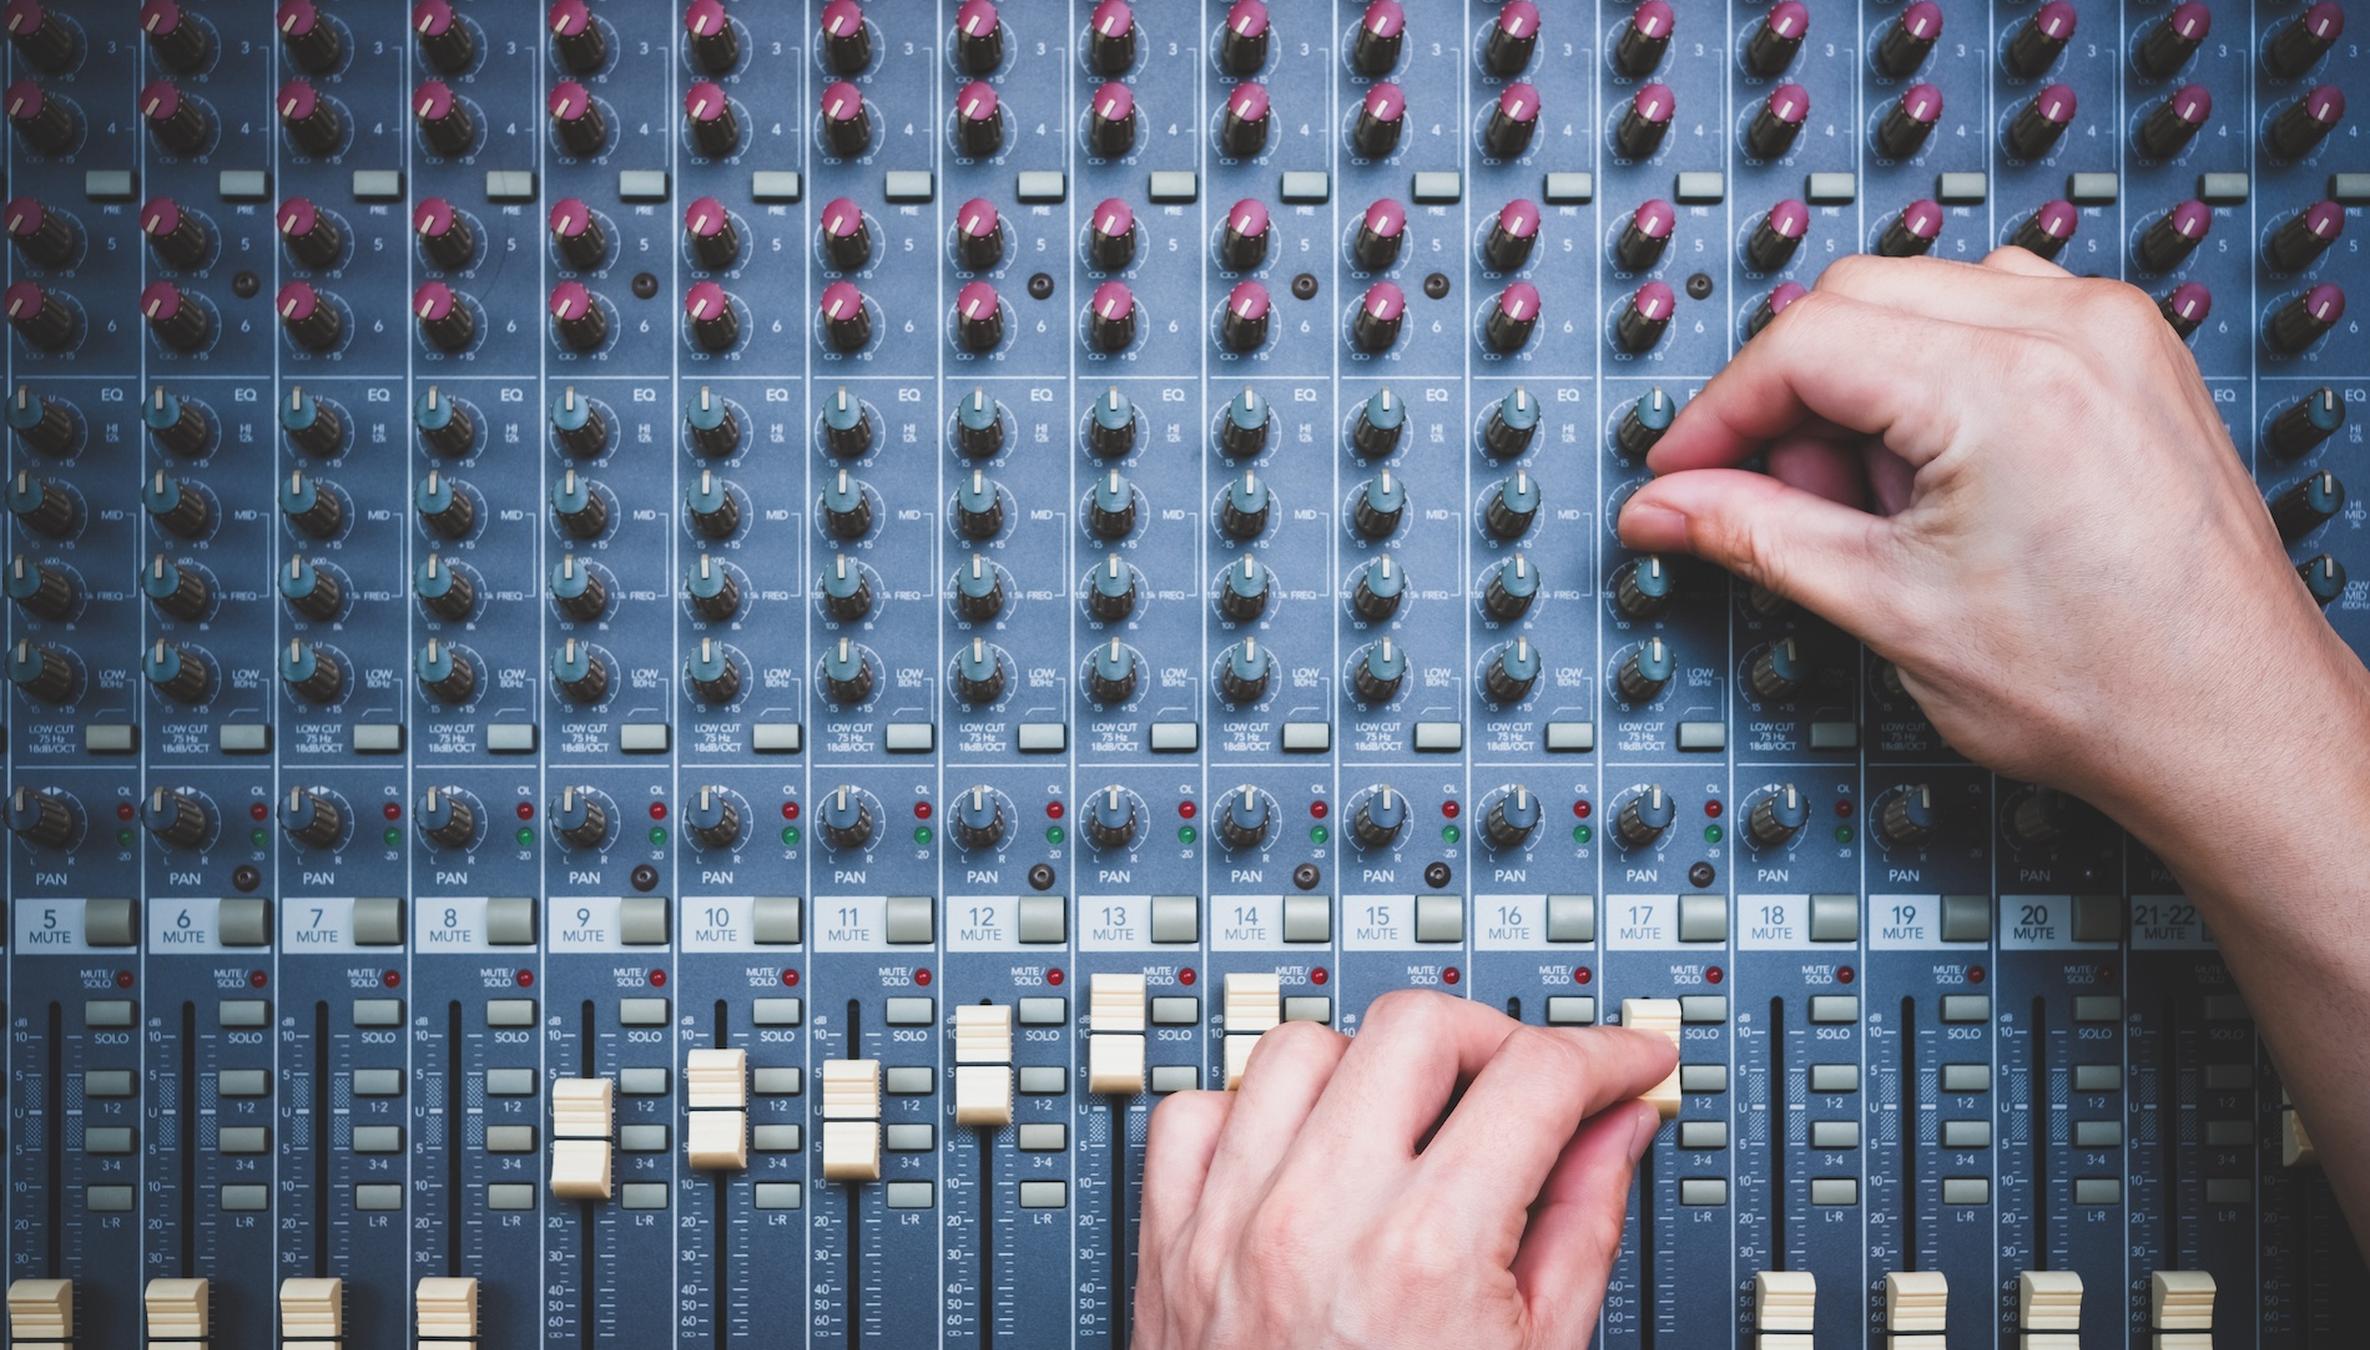 How to Choose an Audio Mixer for Live Sound, Recording and More